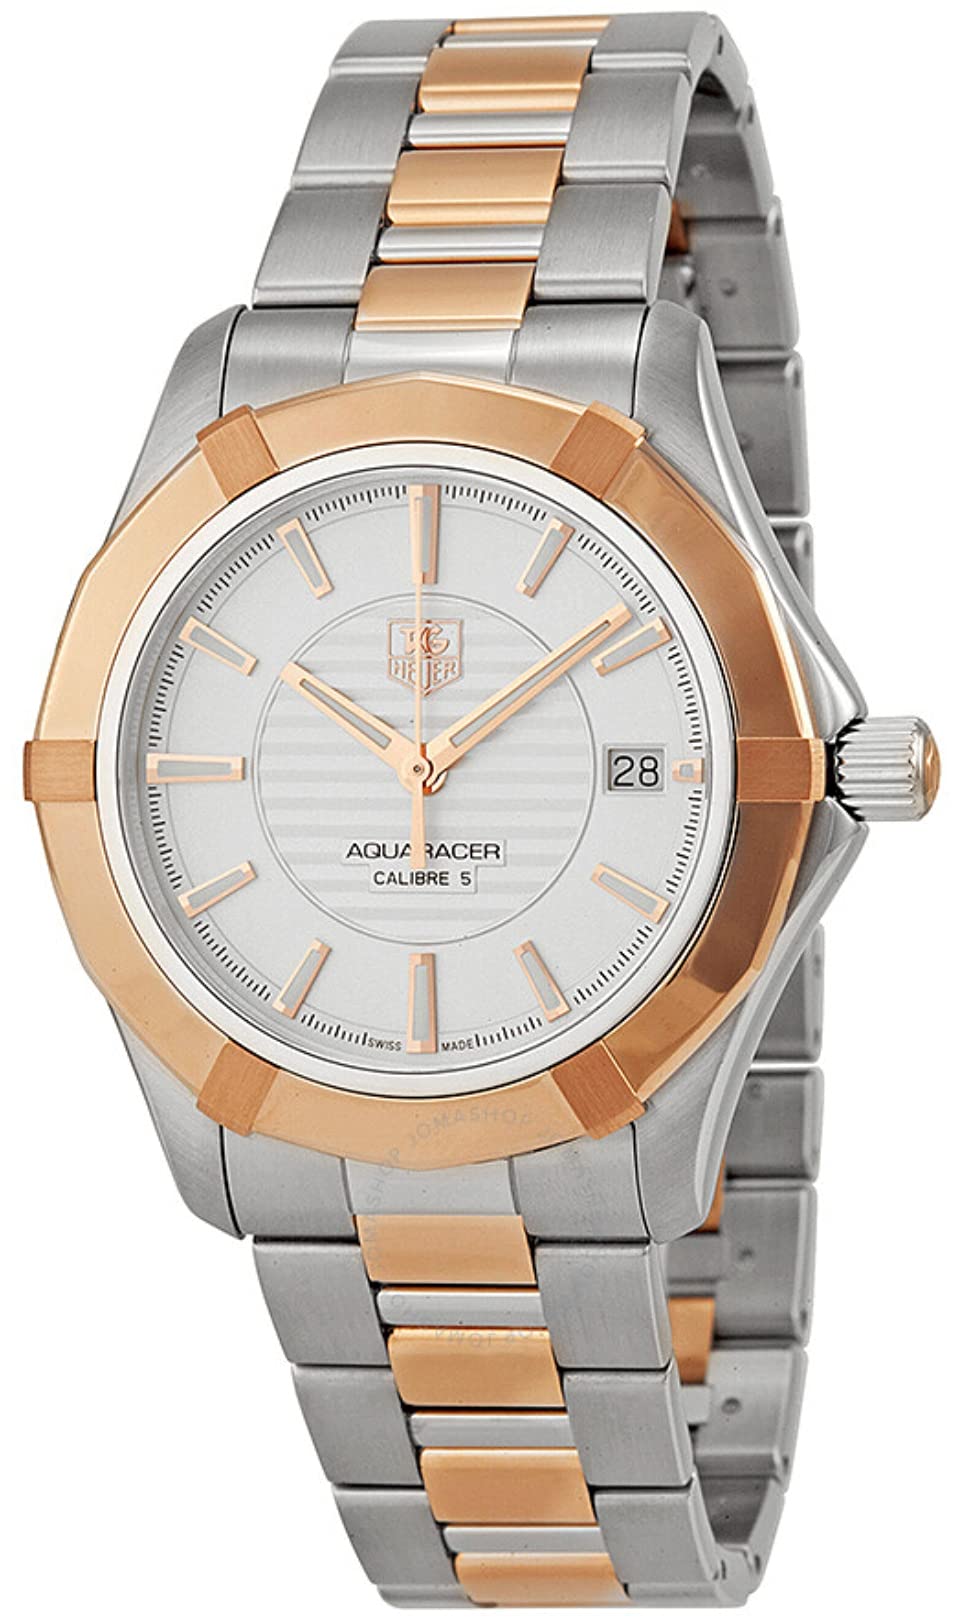 Tag Heuer Aquaracer Automatic Stainless Steel and 18kt Rose Gold Mens Watch WAP2150BD0839